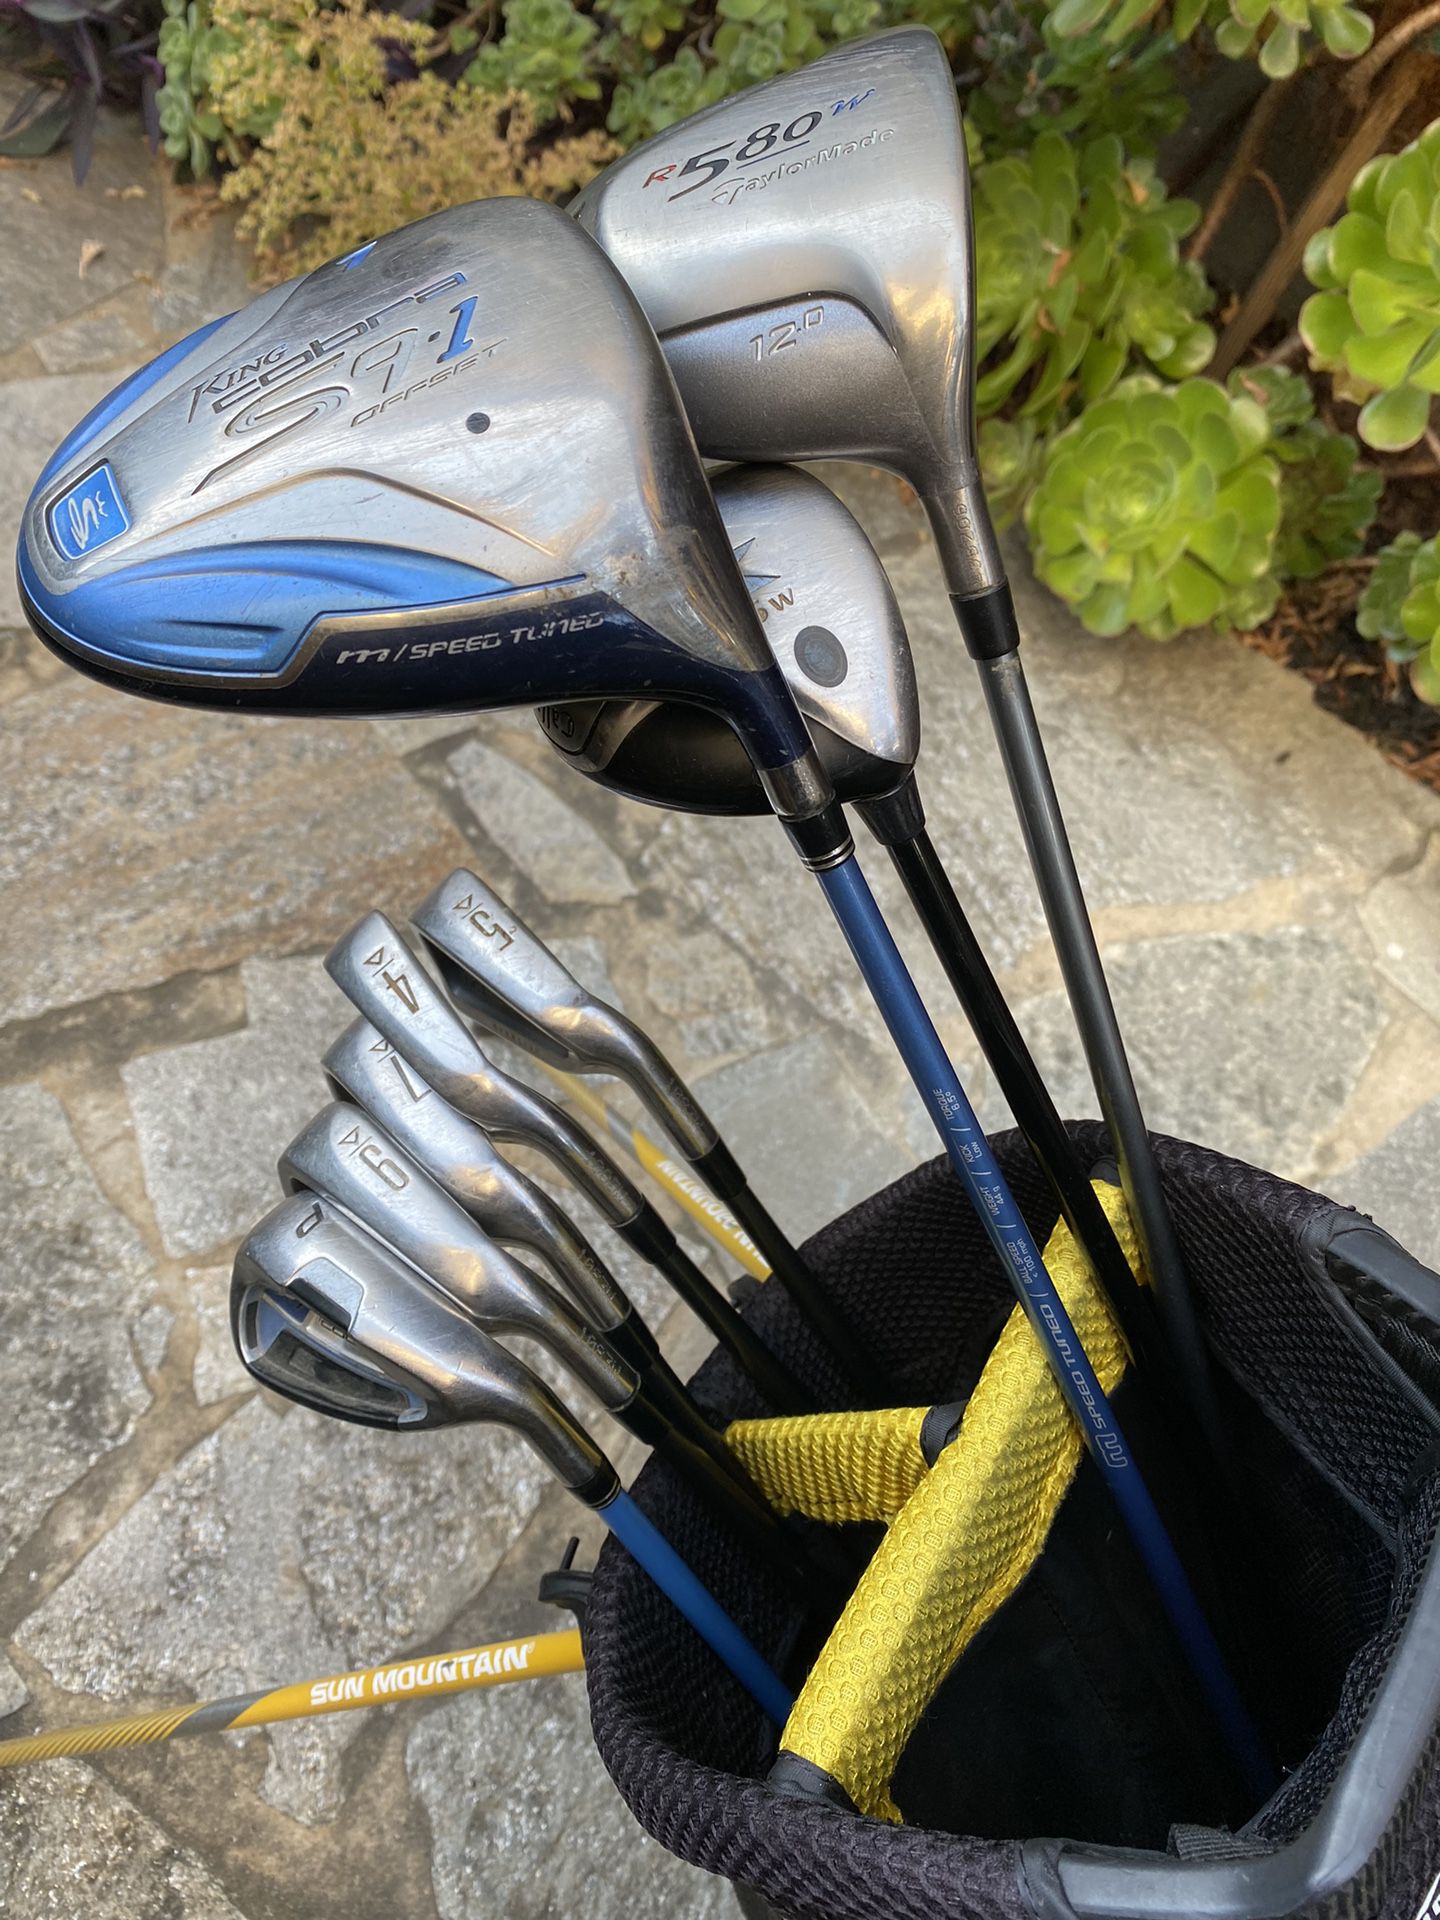 Titleist, Taylor Made Golf Clubs with bag